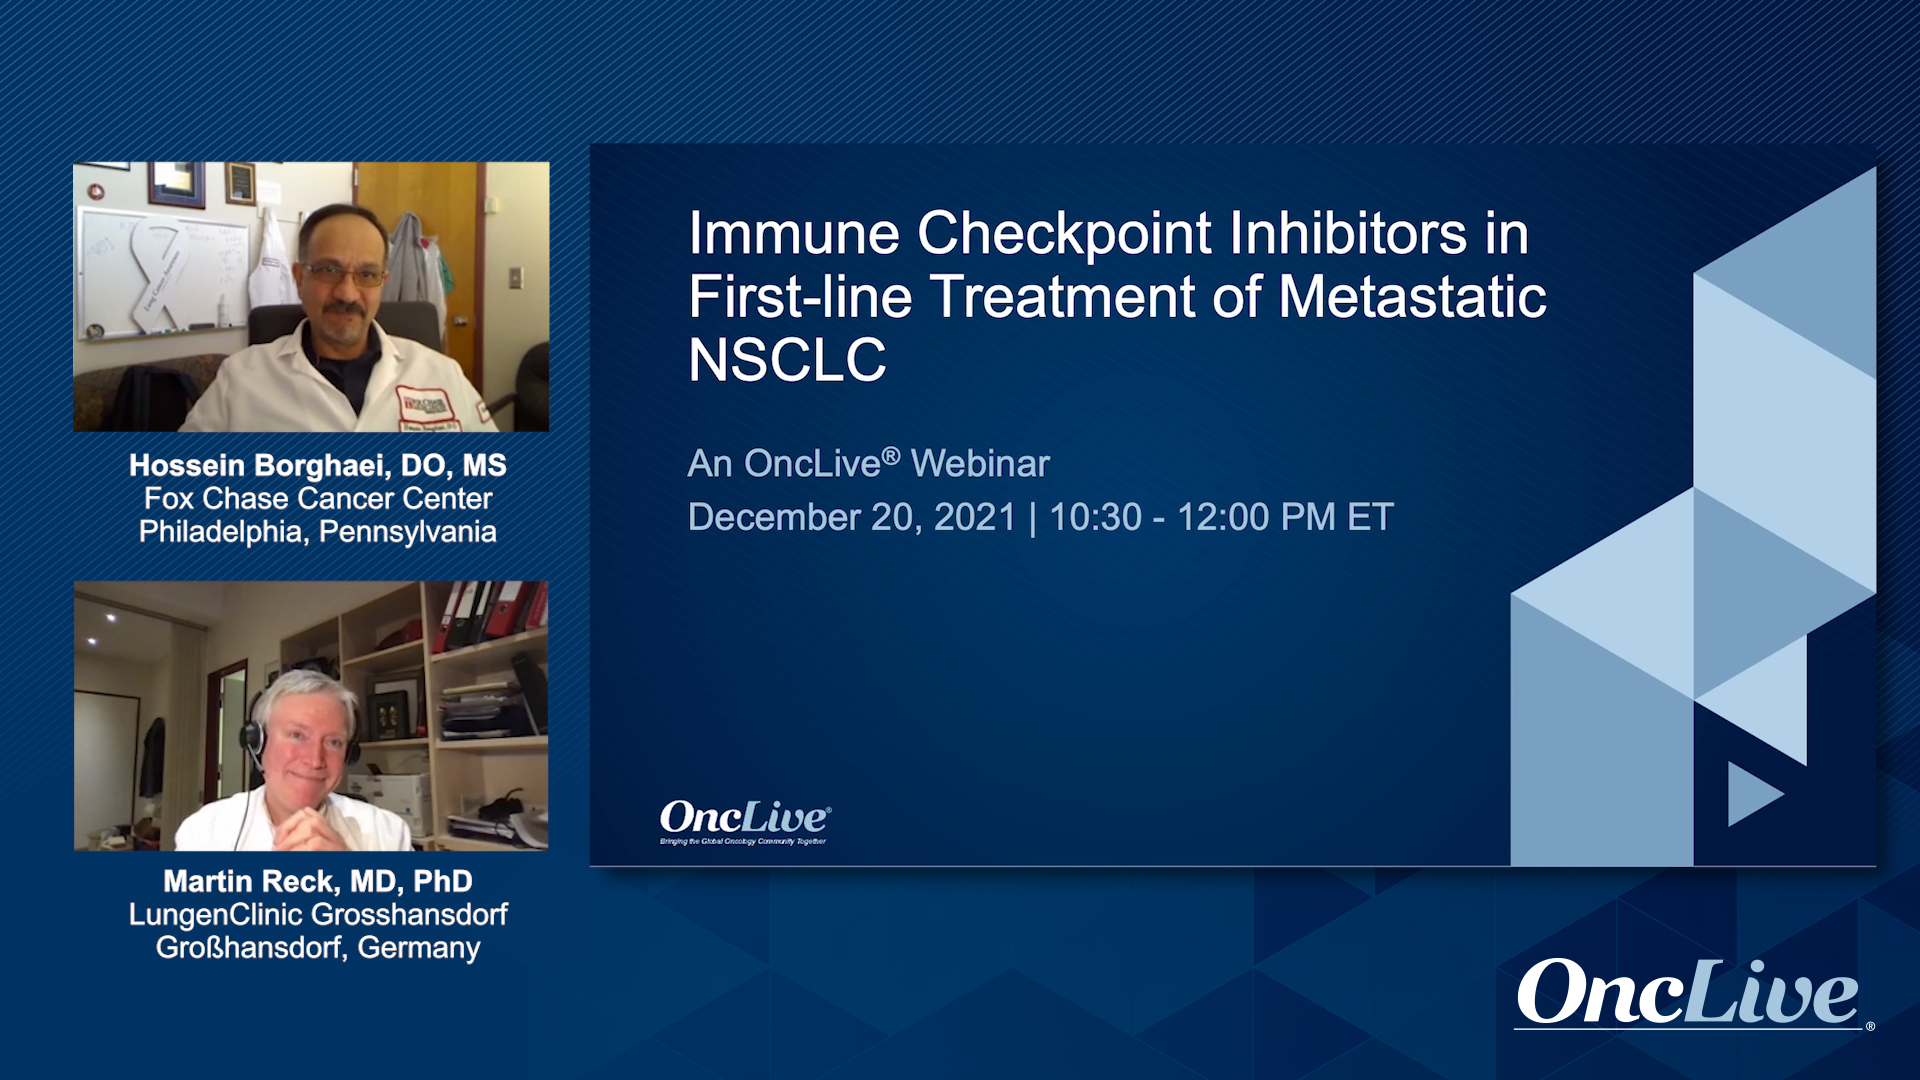 Immune Checkpoint Inhibitors in First-line Treatment of Metastatic NSCLC